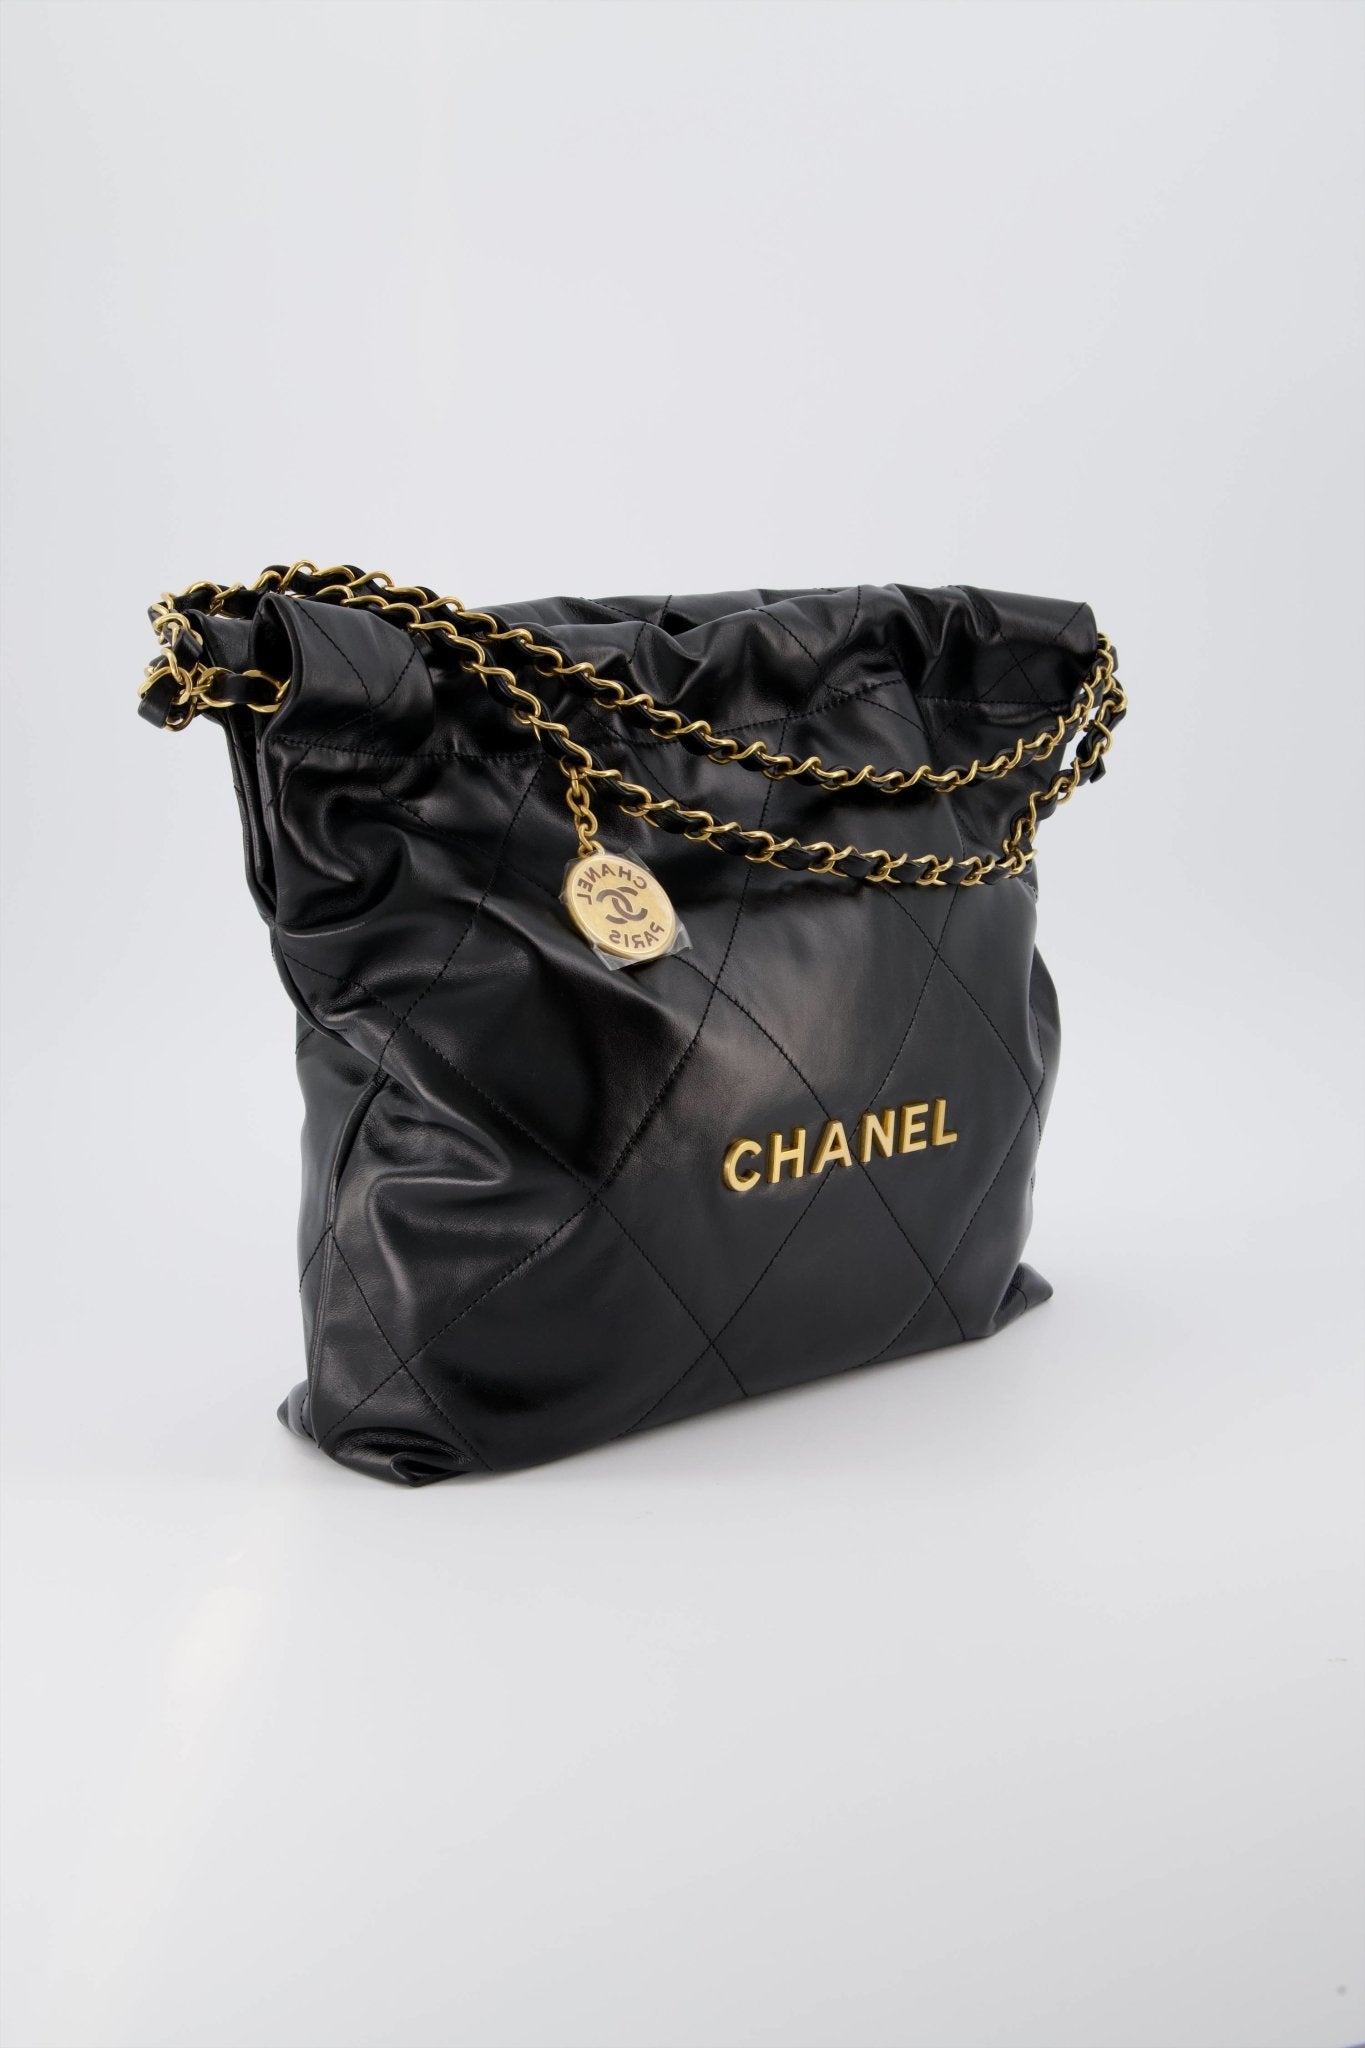 Chanel - Authenticated Chanel 22 Handbag - Leather Black Plain for Women, Very Good Condition